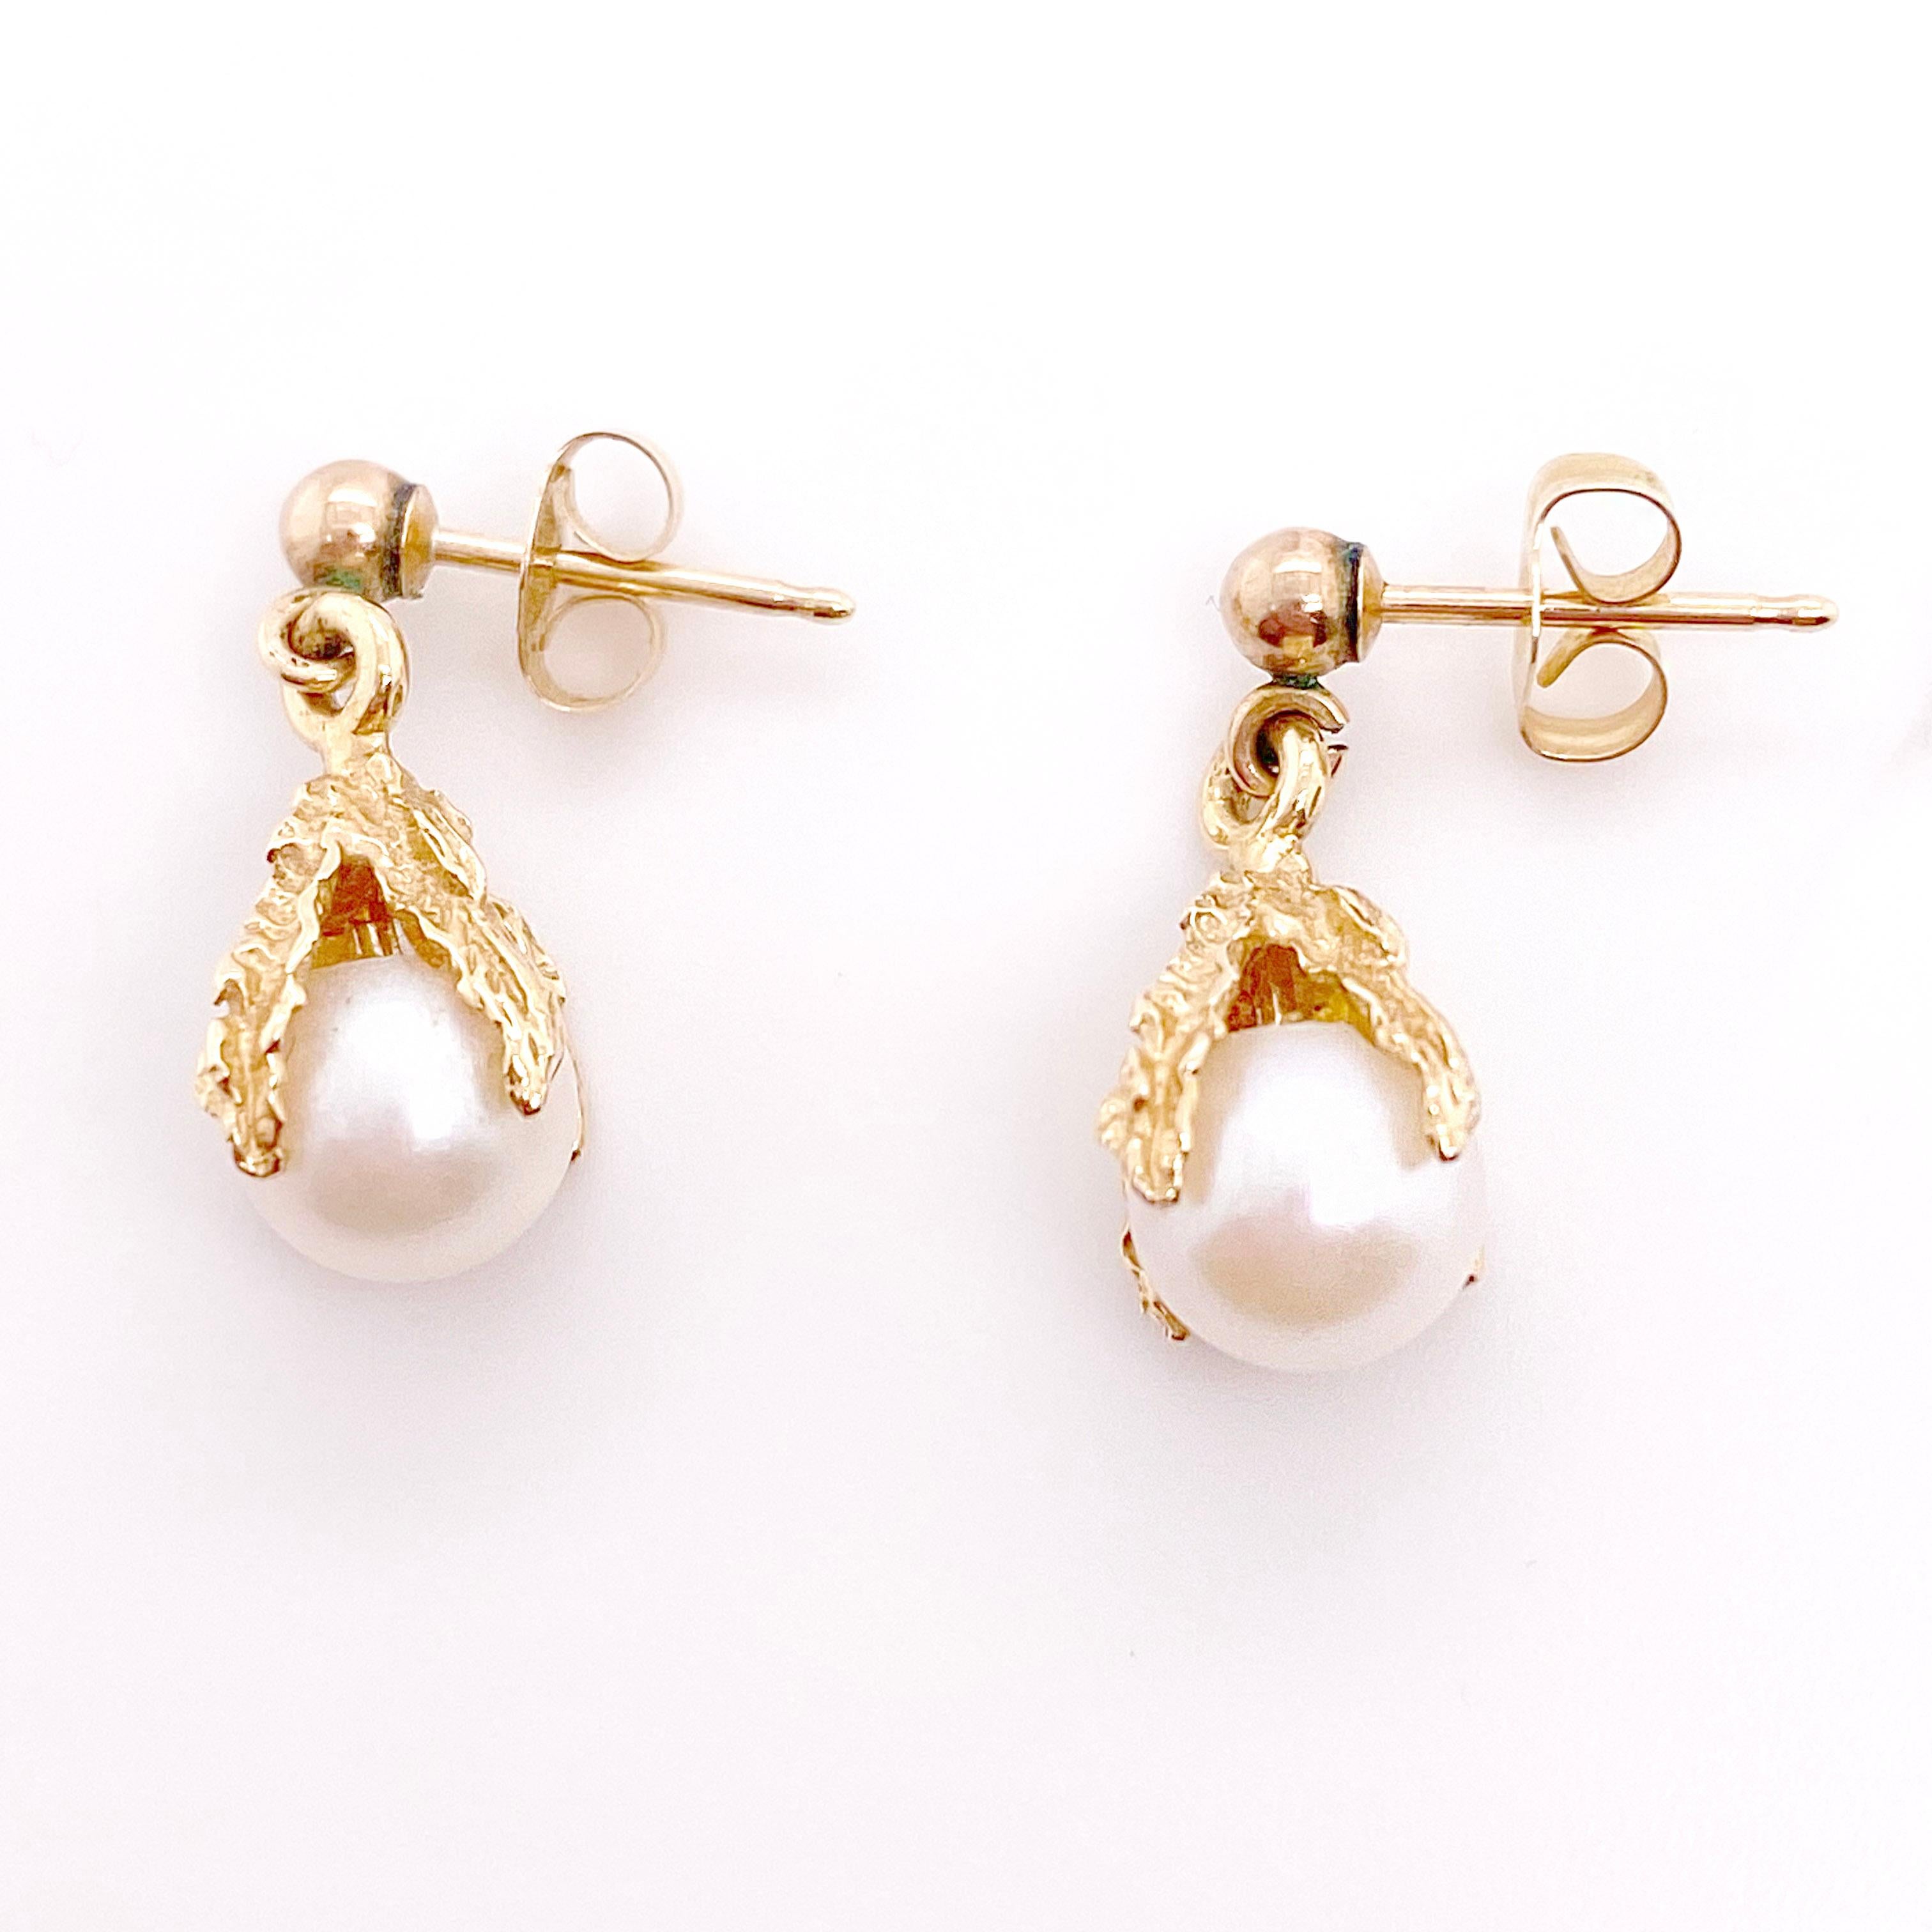 These drop pearl earrings are gorgeous with their talon design! The texture is gorgeous and this is well made yellow gold handcrafted design. The gold ball earring at the top is 14 karat yellow gold along with the earrings post and backs. The